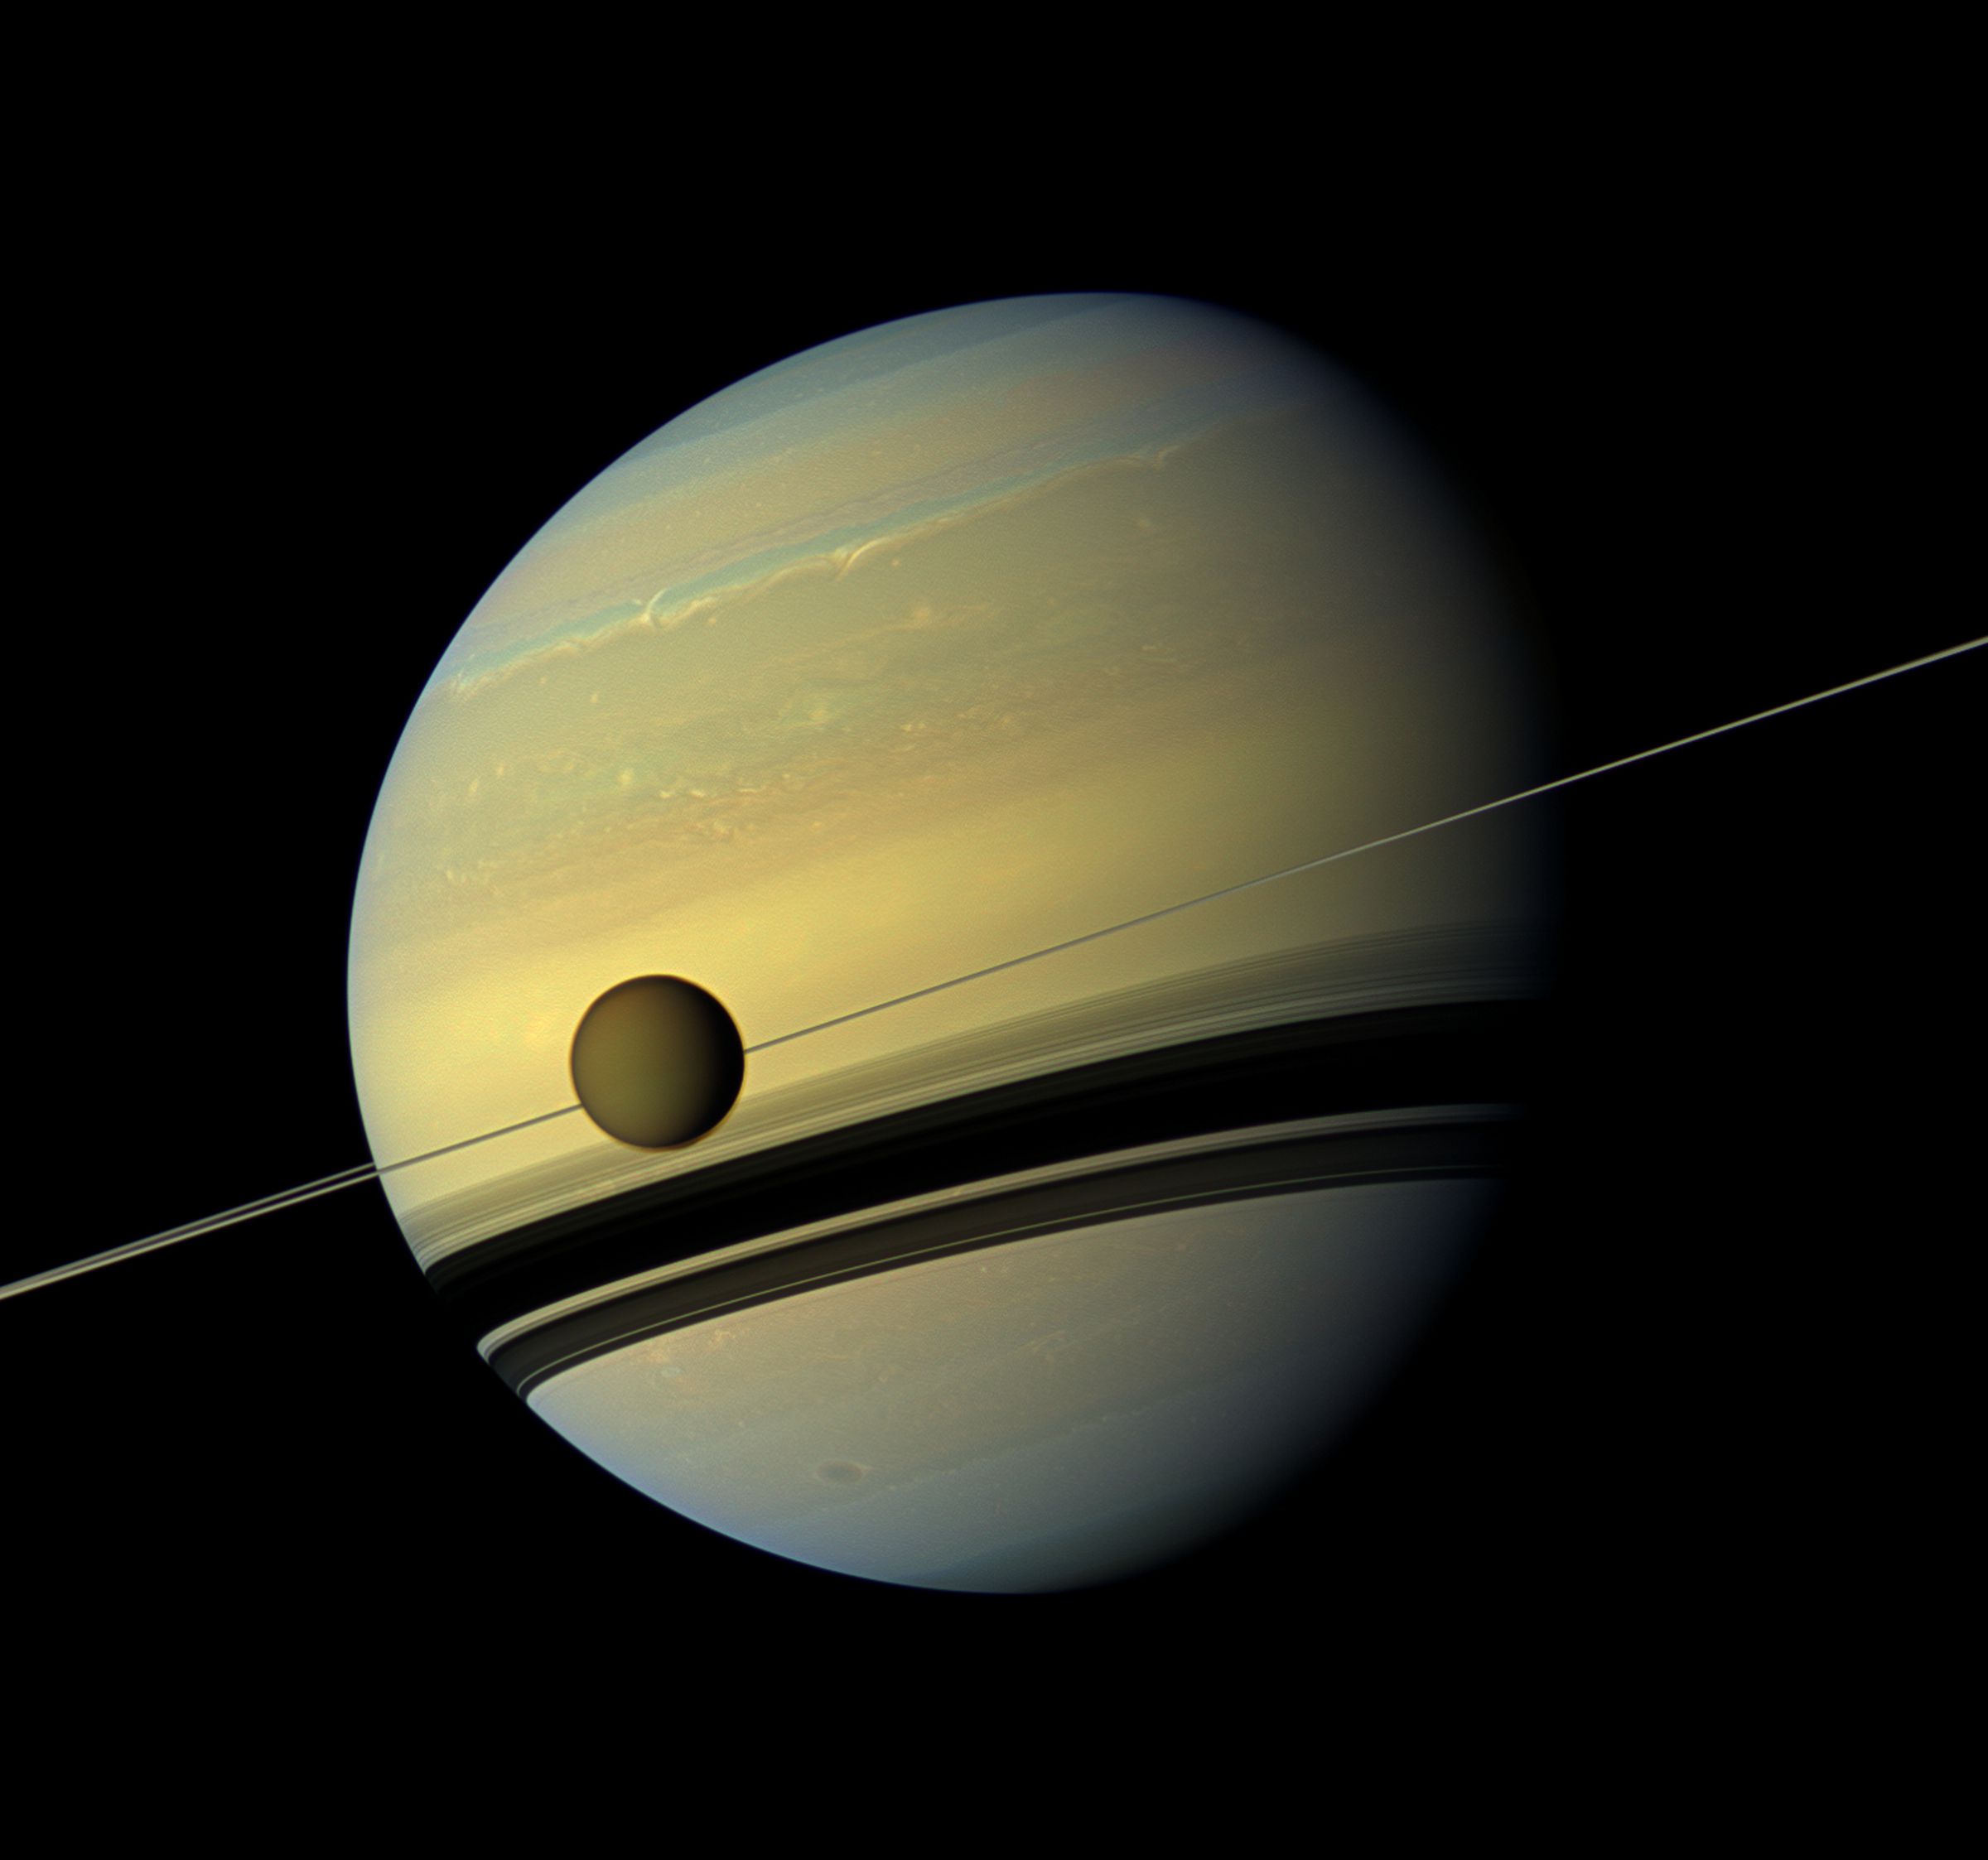 Titan in front of Saturn, photographed on May 6th, 2012.